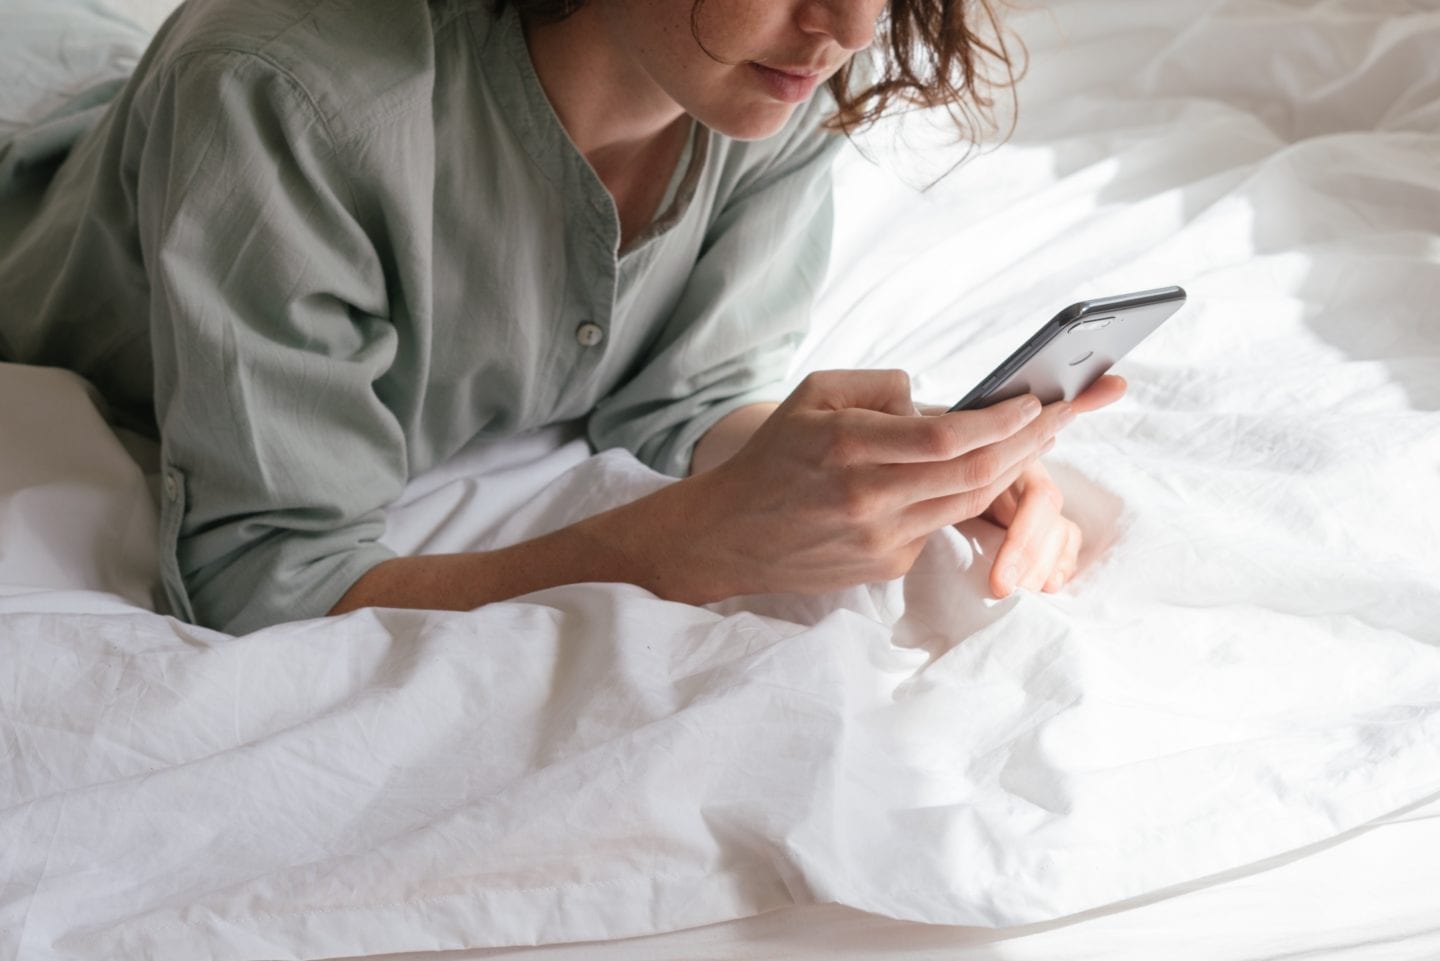 Woman checking phone while in bed. Avoid online platforms in the morning to have a healthy relationship with social media. 